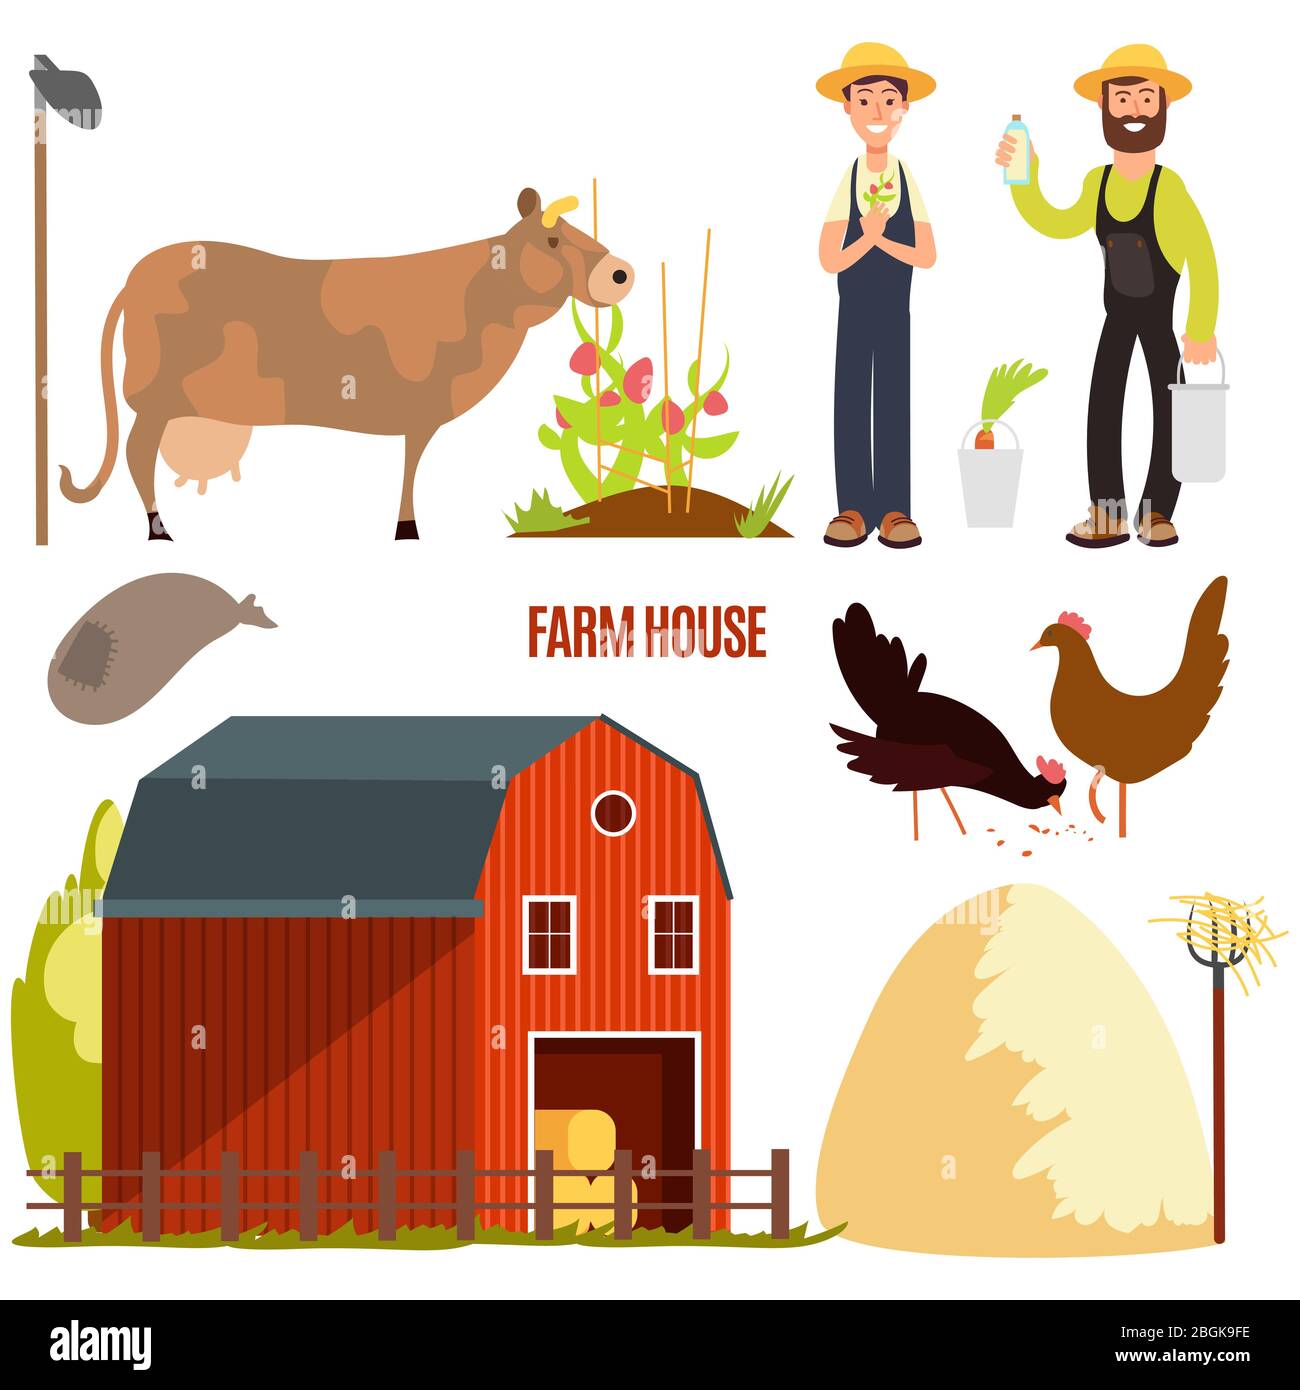 Farming. Farm cartoon character vector elements. Farm animal and agriculture, barn and chicken, cow and farming illustration Stock Vector